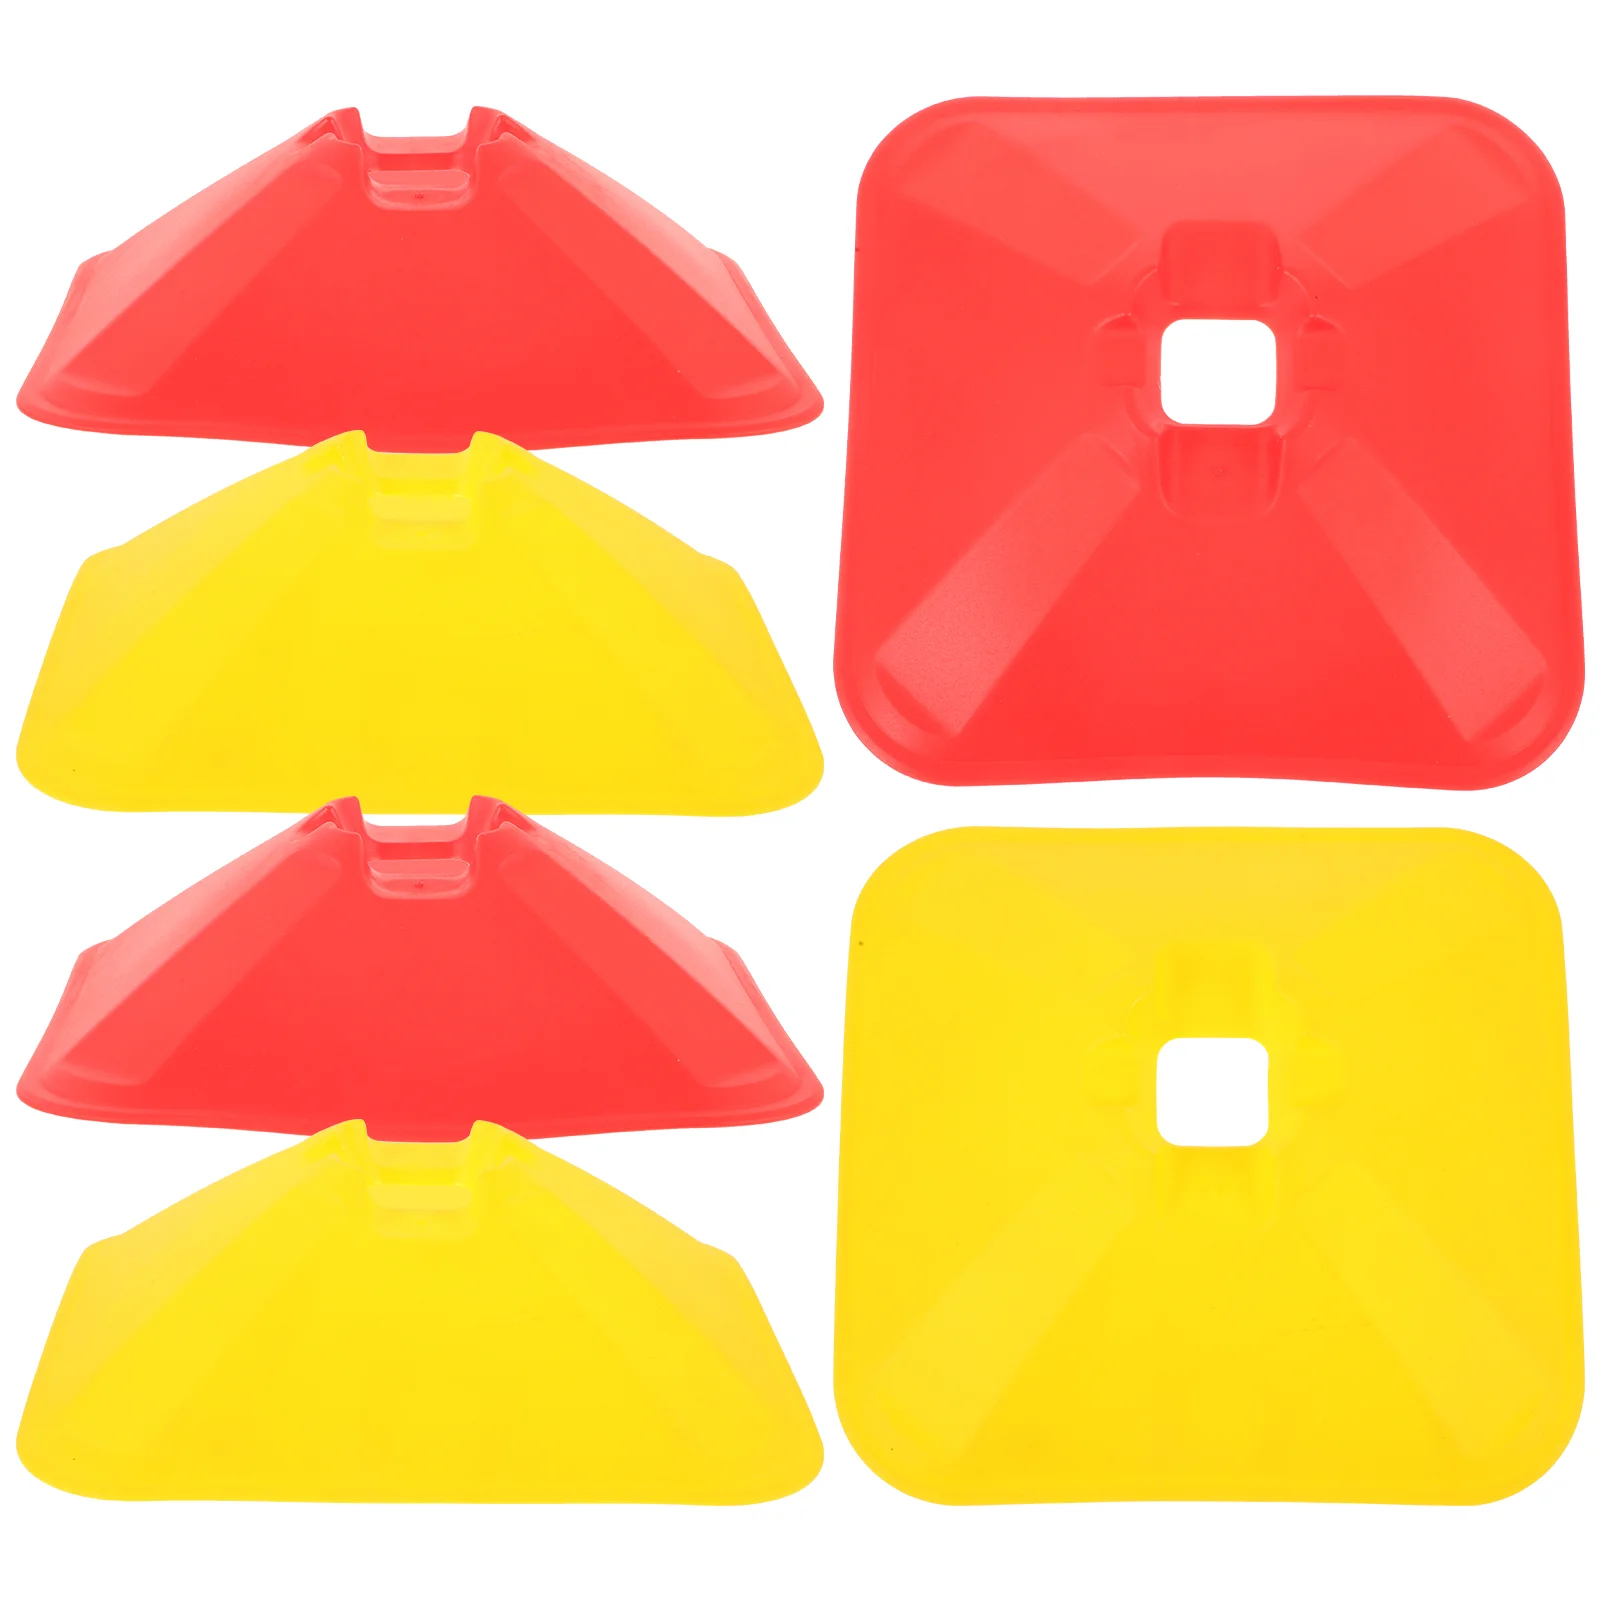 

6 Pcs Marking Signs Football Marker Training Soccer Discs Obstacle Exercising Equipment